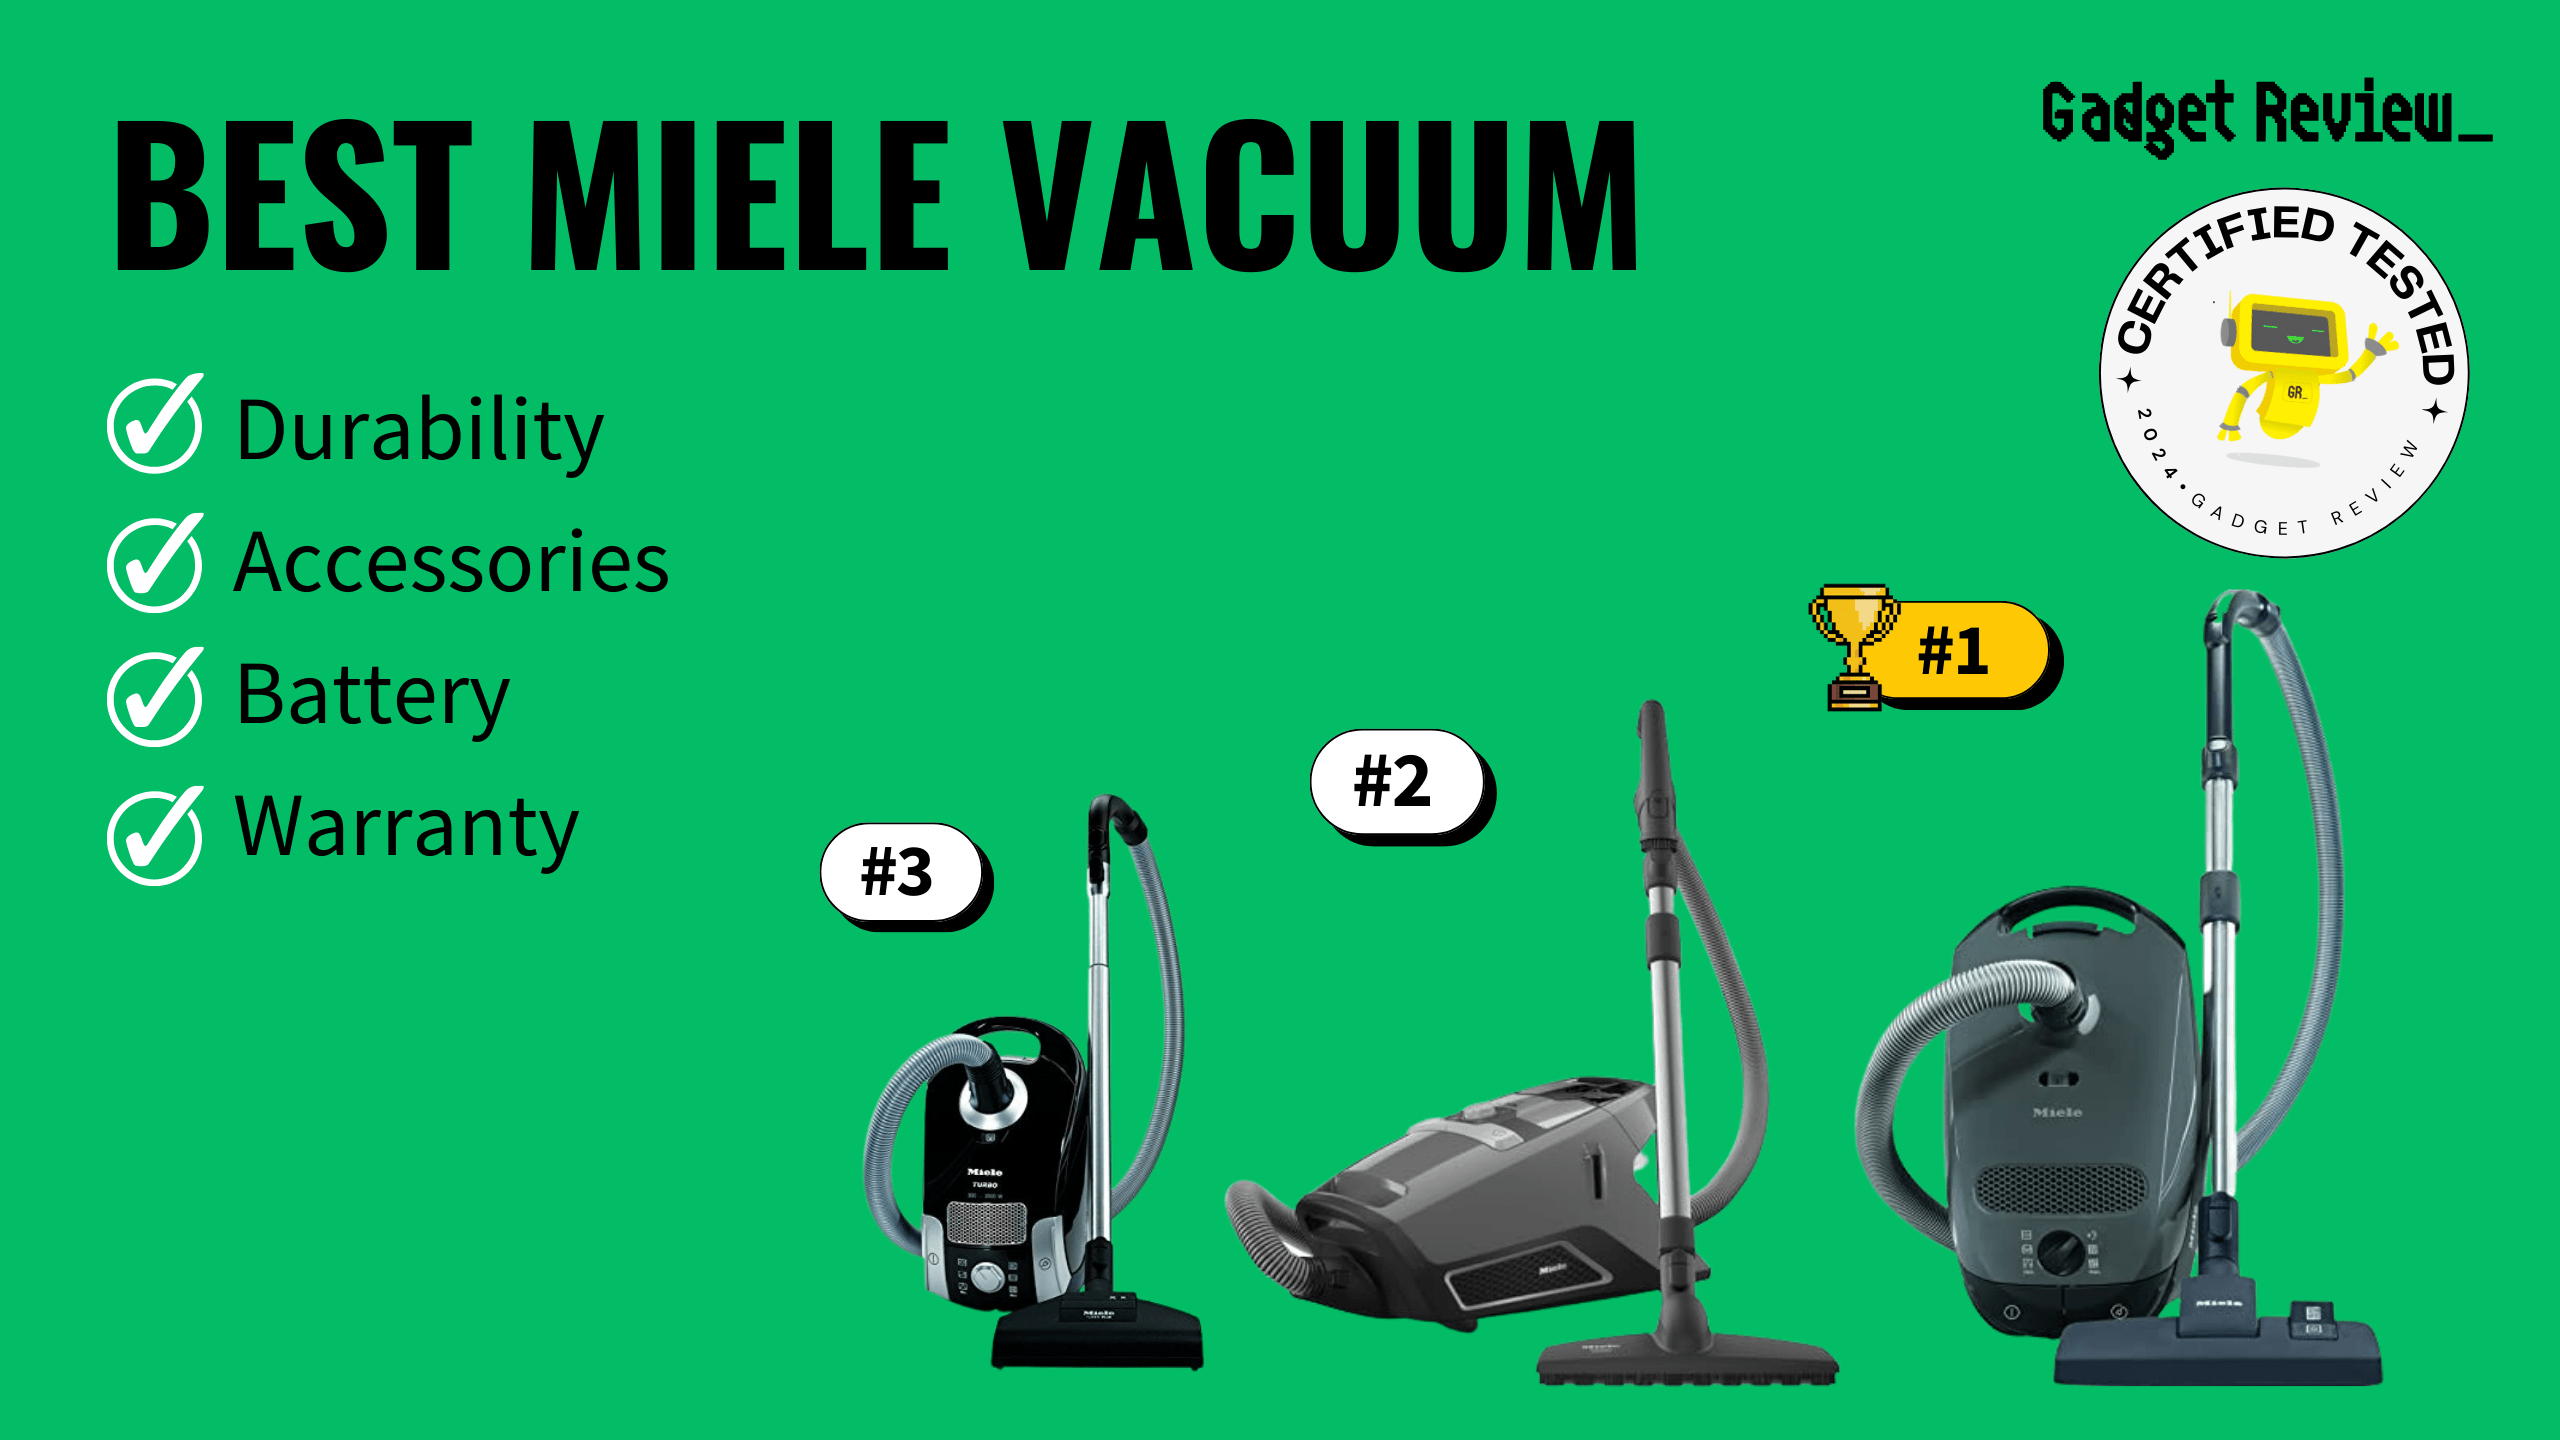 best miele vacuum guide that shows the top best vacuum cleaner model